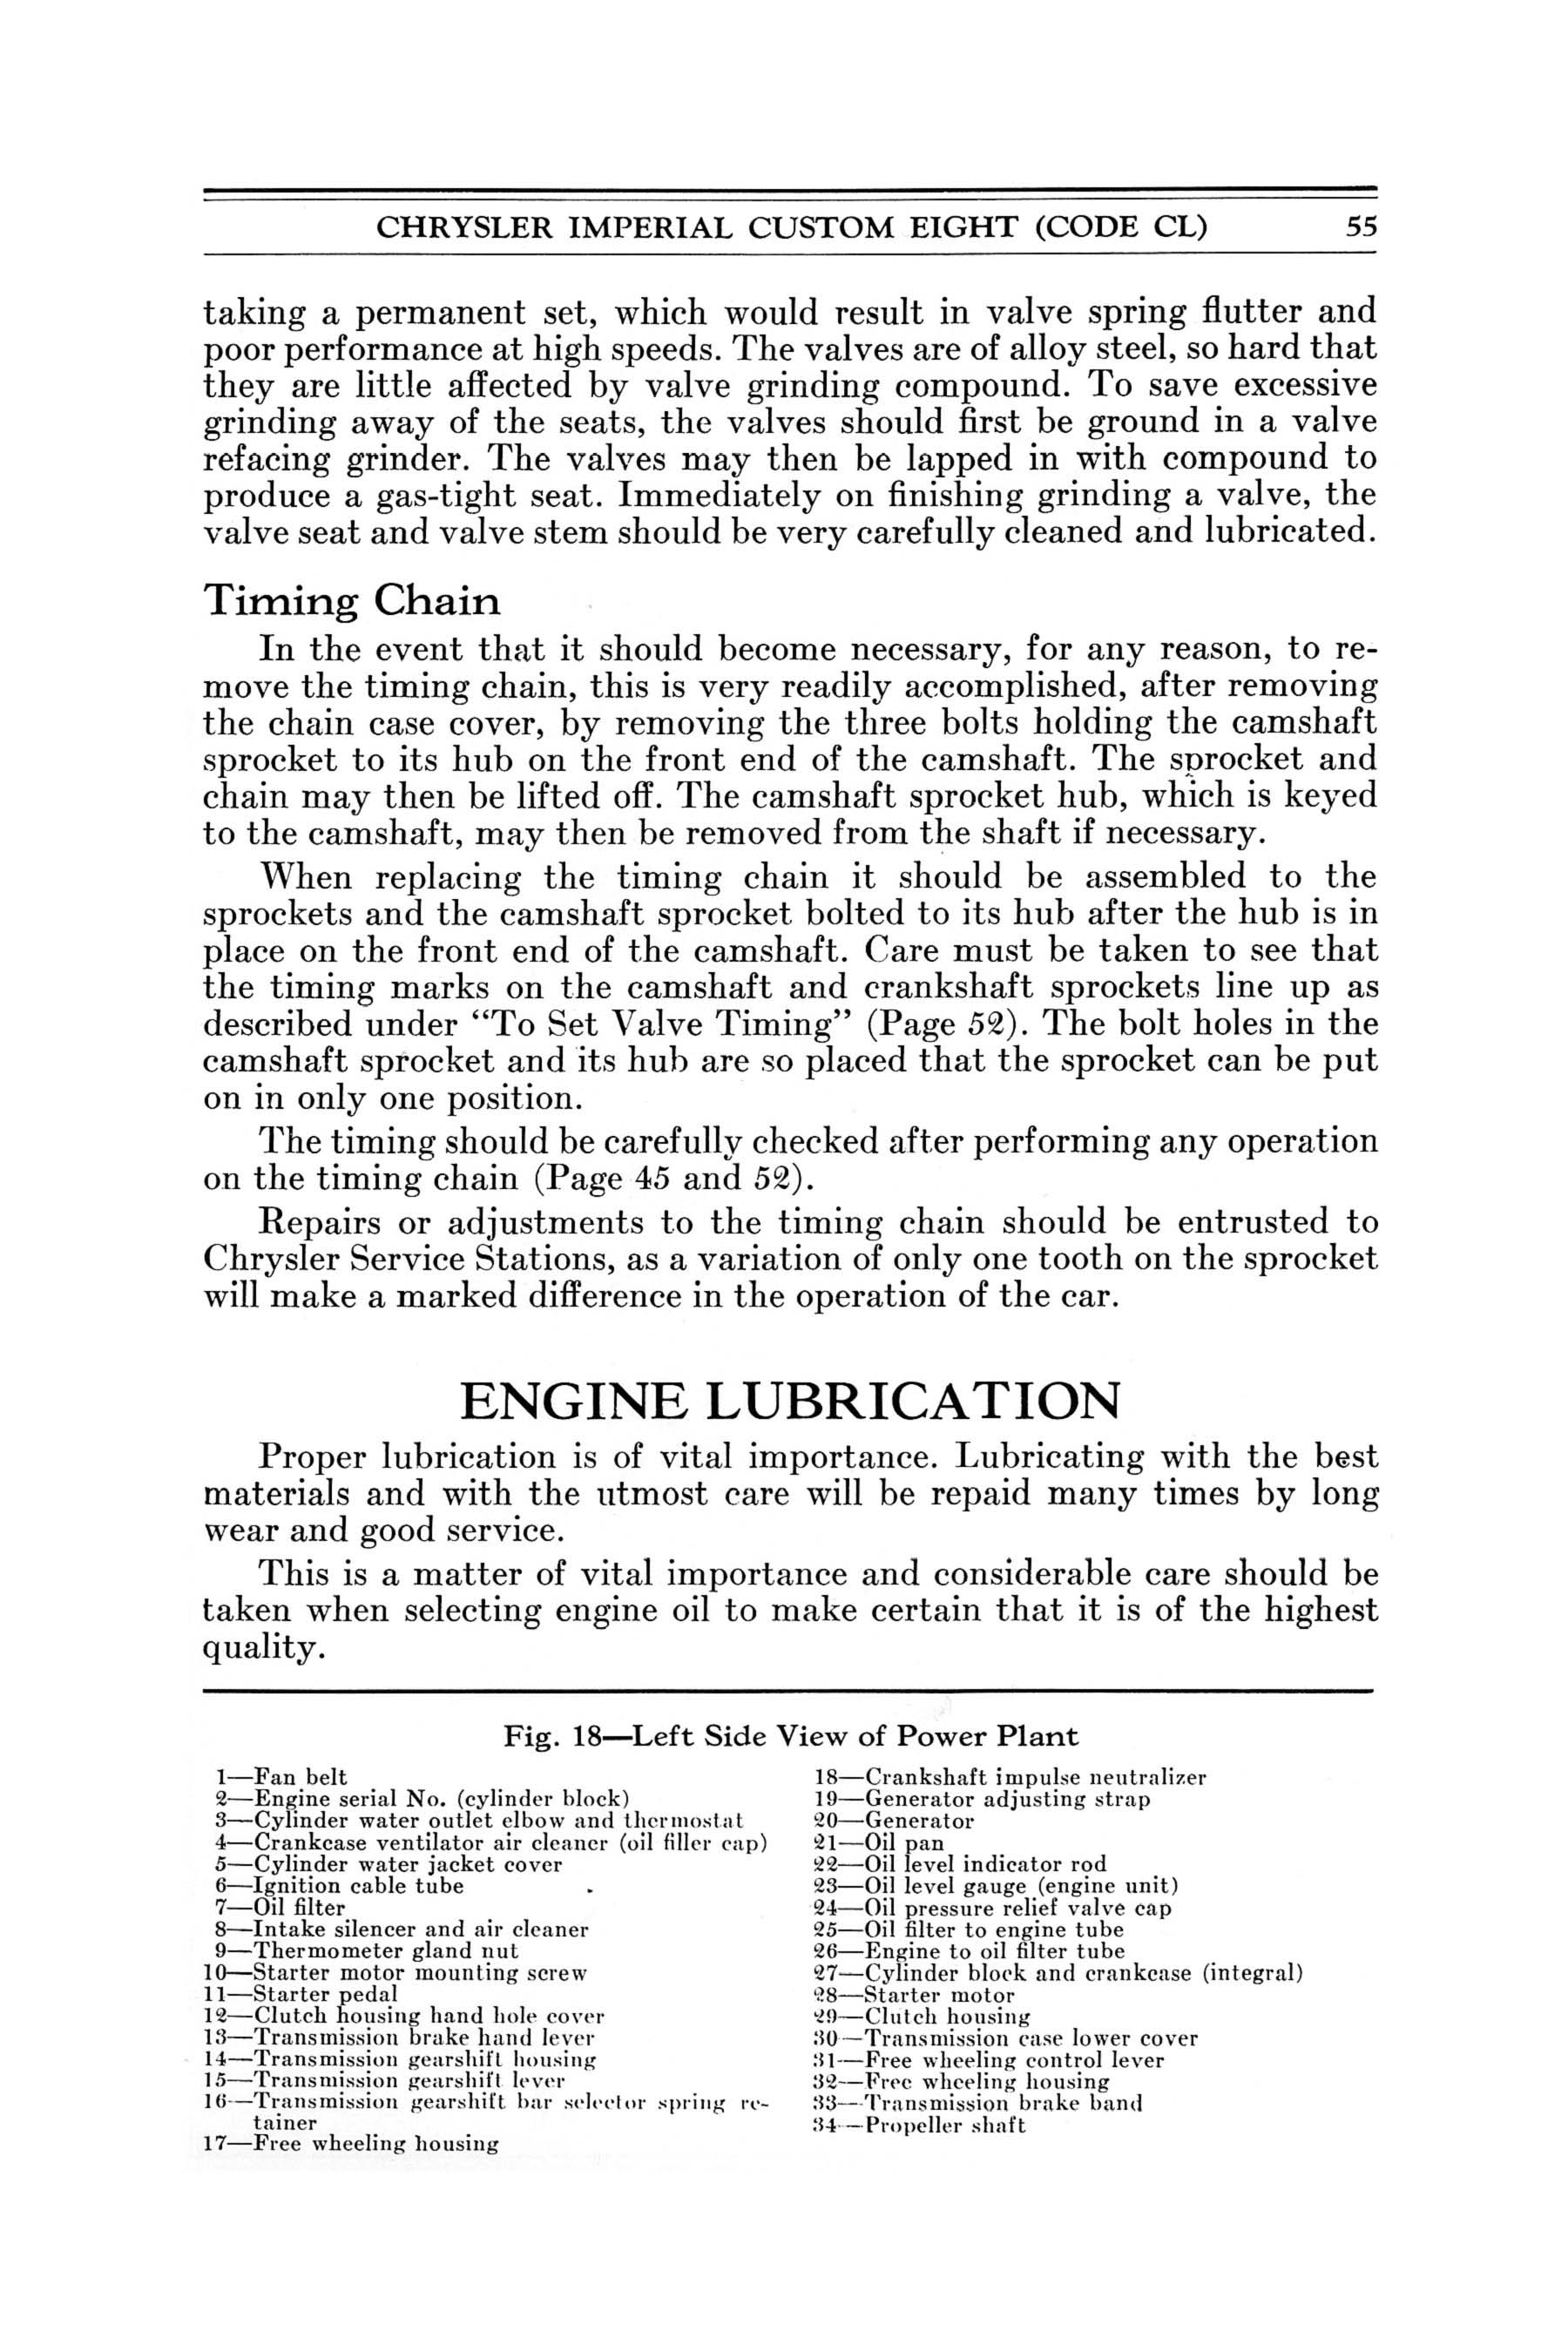 1932 Chrysler Imperial Instruction Book Page 63